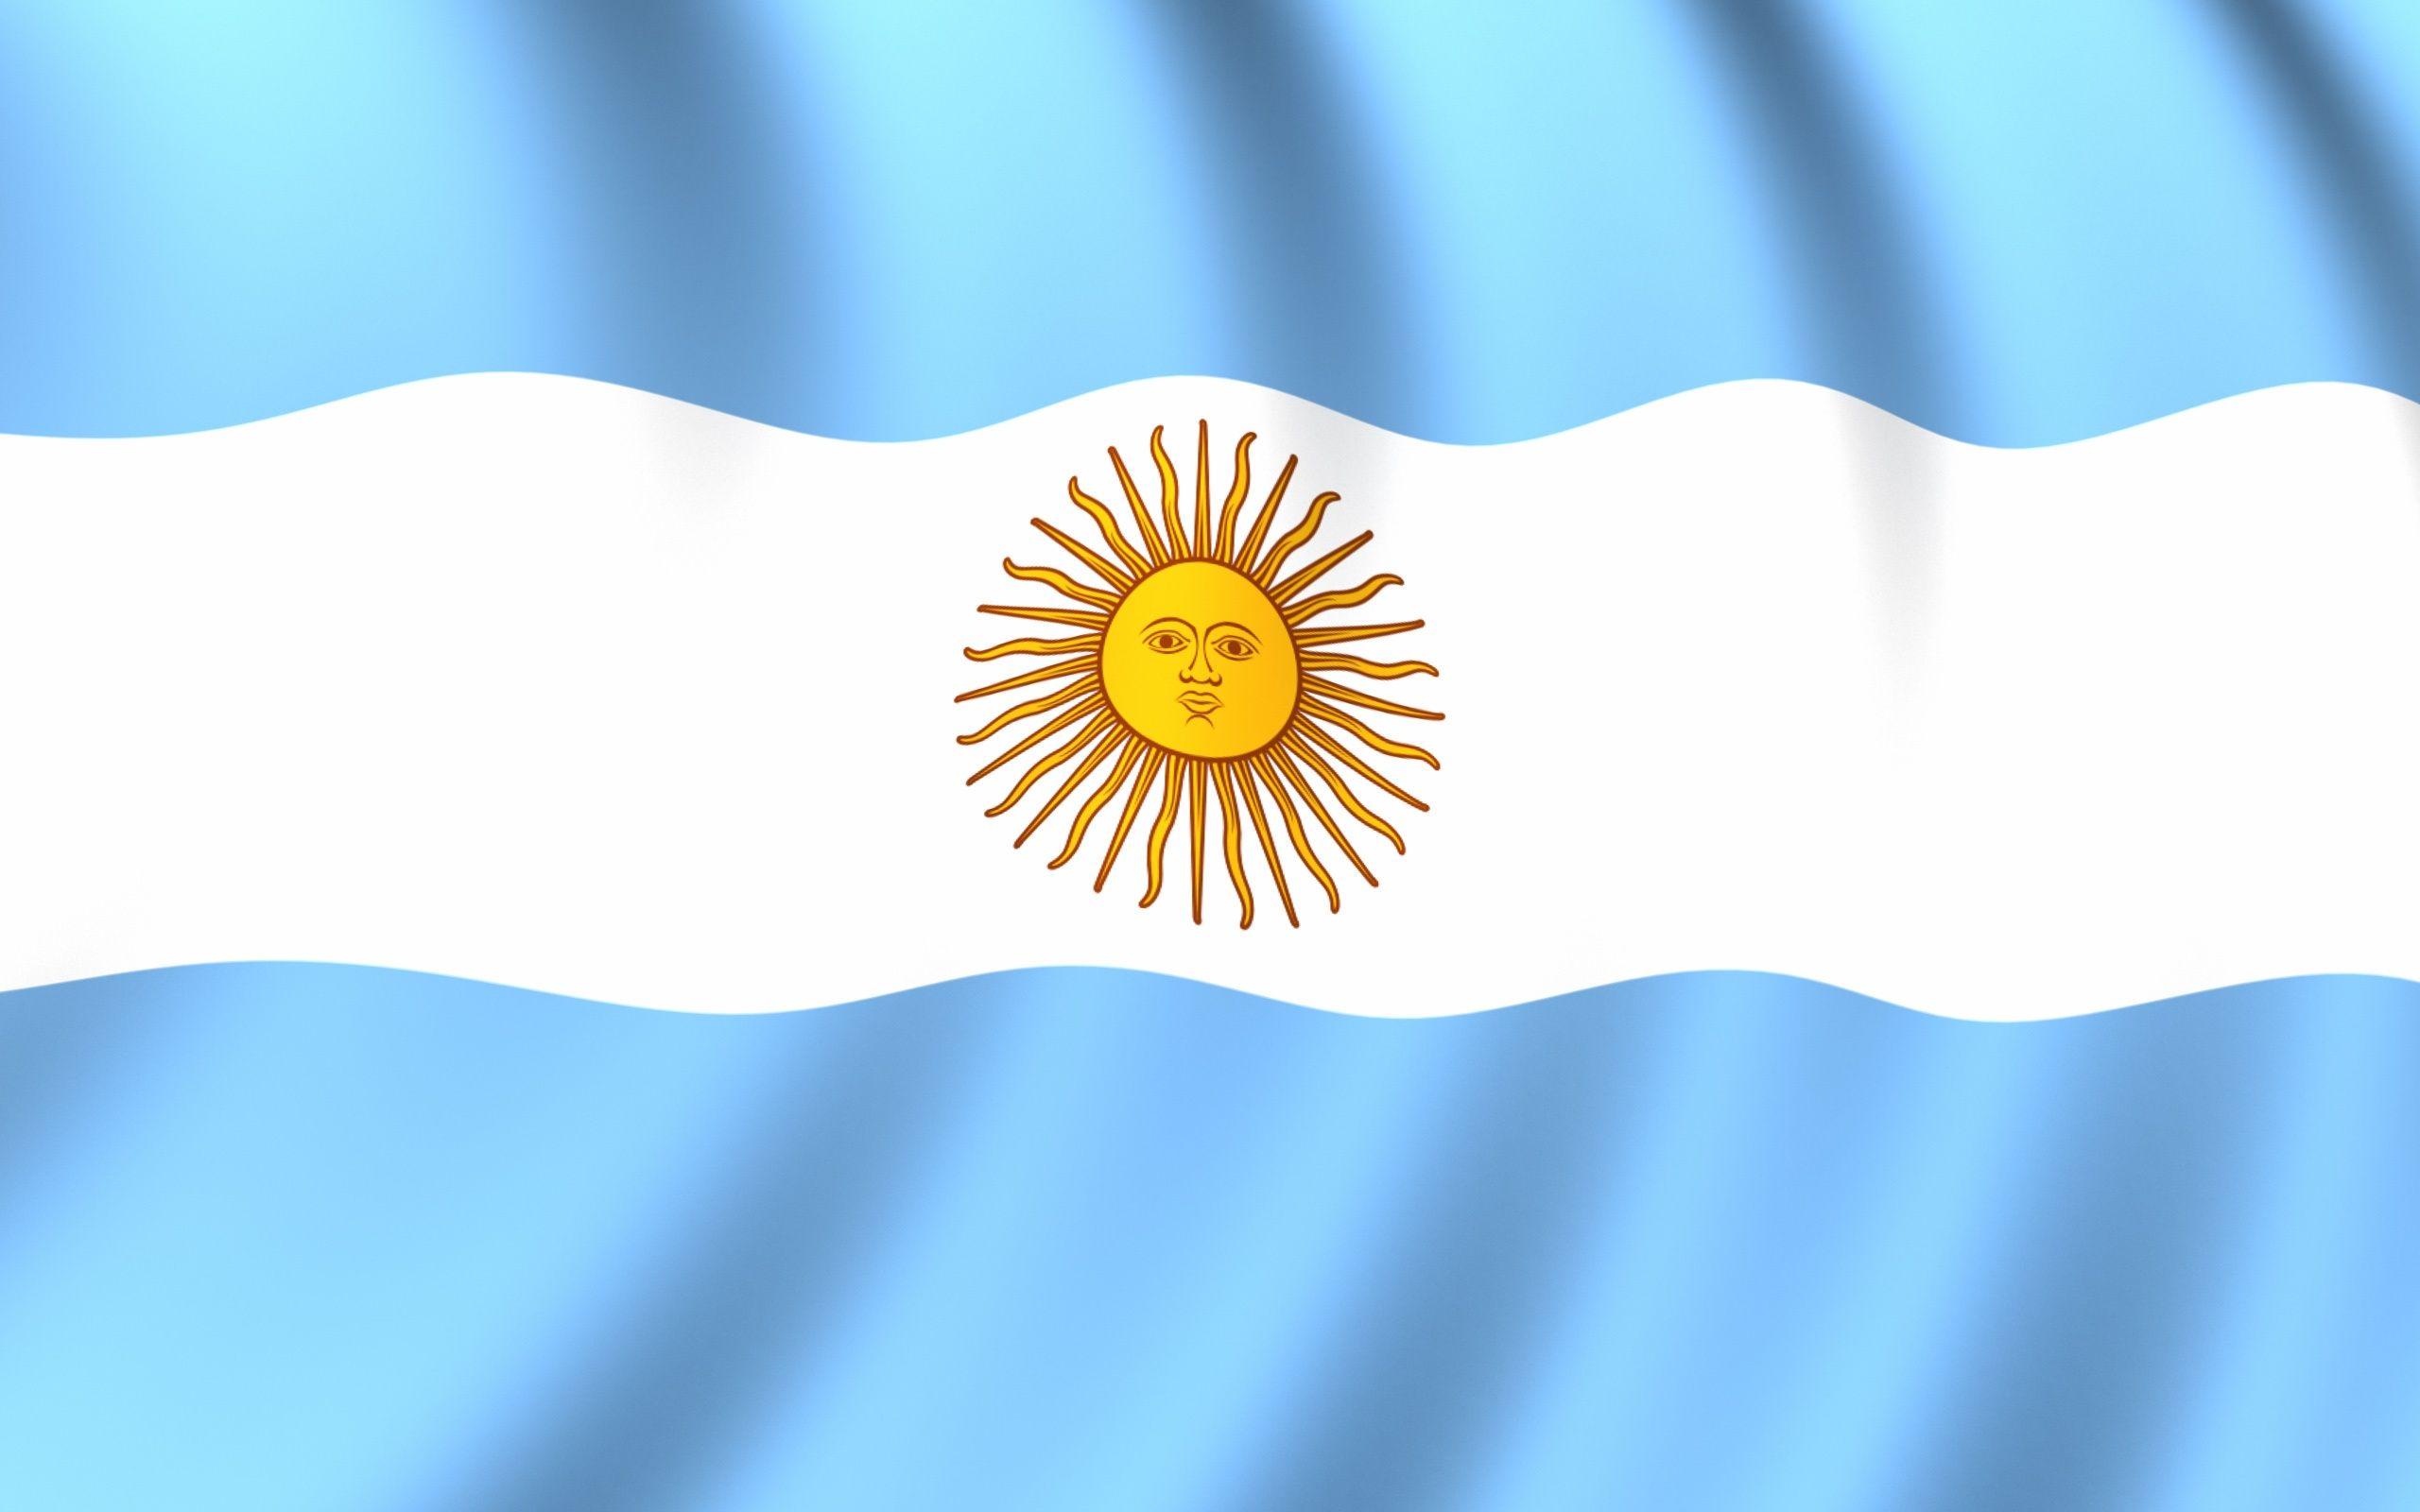 Wallpaper.wiki Download Free Argentina Flag Wallpaper PIC WPC0011653